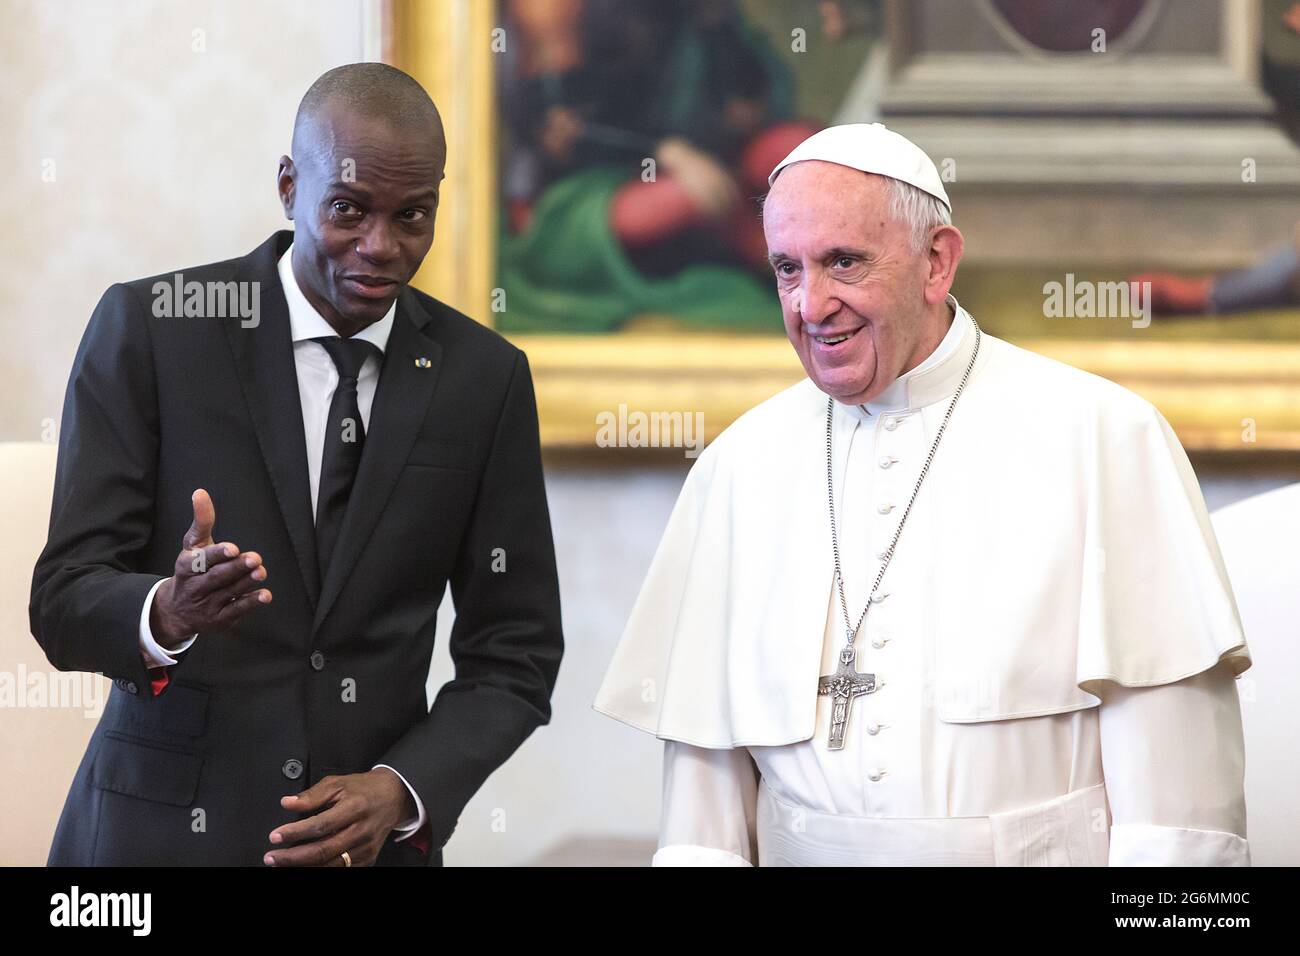 Vatican City State, Vatikanstadt. 07th July, 2021. The president of Haiti, Jovenel Moïse, was assassinated: he was 53 years old. In the photo Pope Francis with the President of the Republic of Haiti H.E. Mr. Jovenel Moise. January 26, 2018 Credit: dpa/Alamy Live News Stock Photo